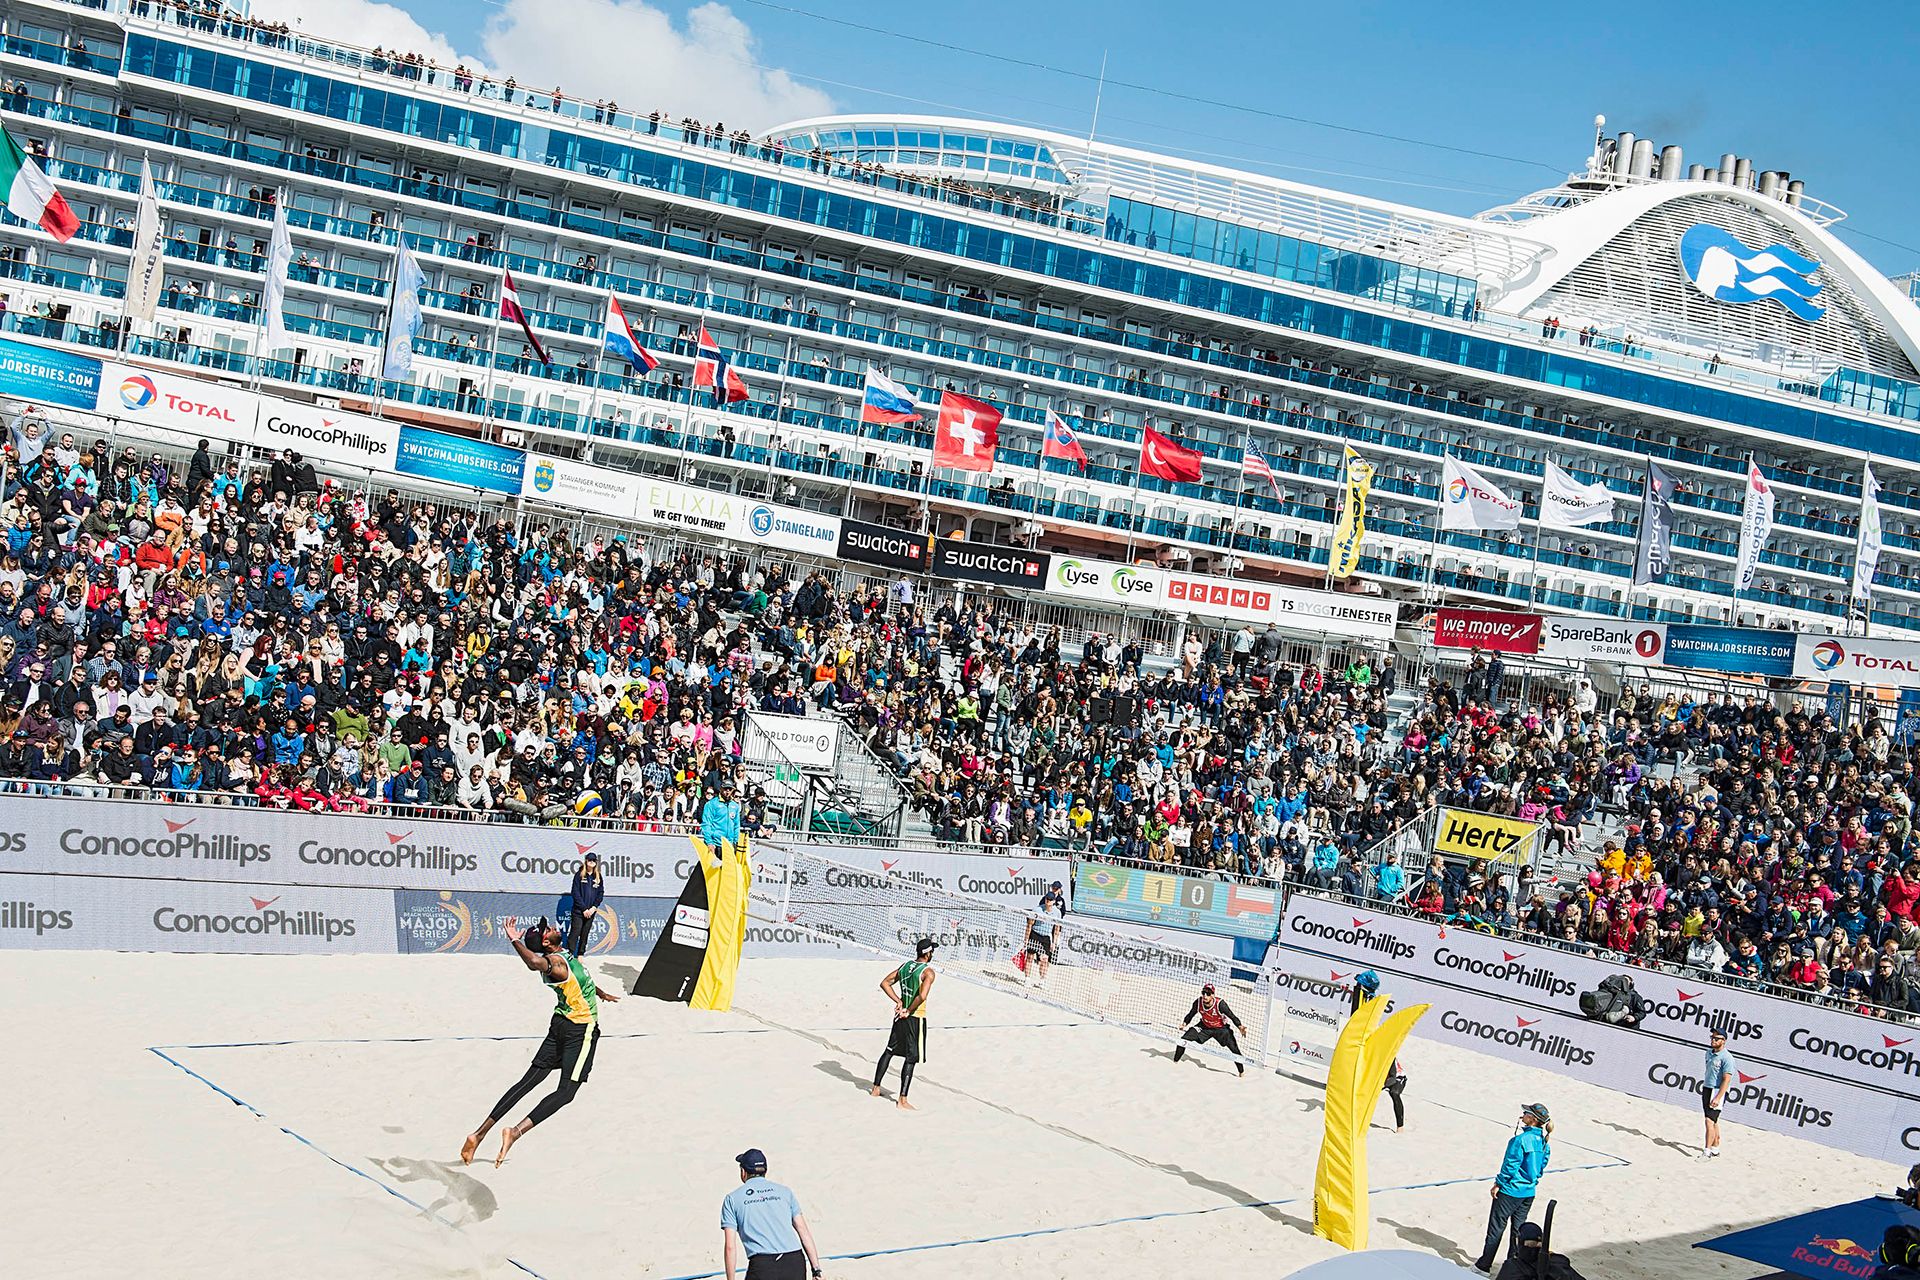 Stavanger Major in 2015 placed its Center Court into the unique setting of the city’s harbor; Photocredit: Joerg Mitter